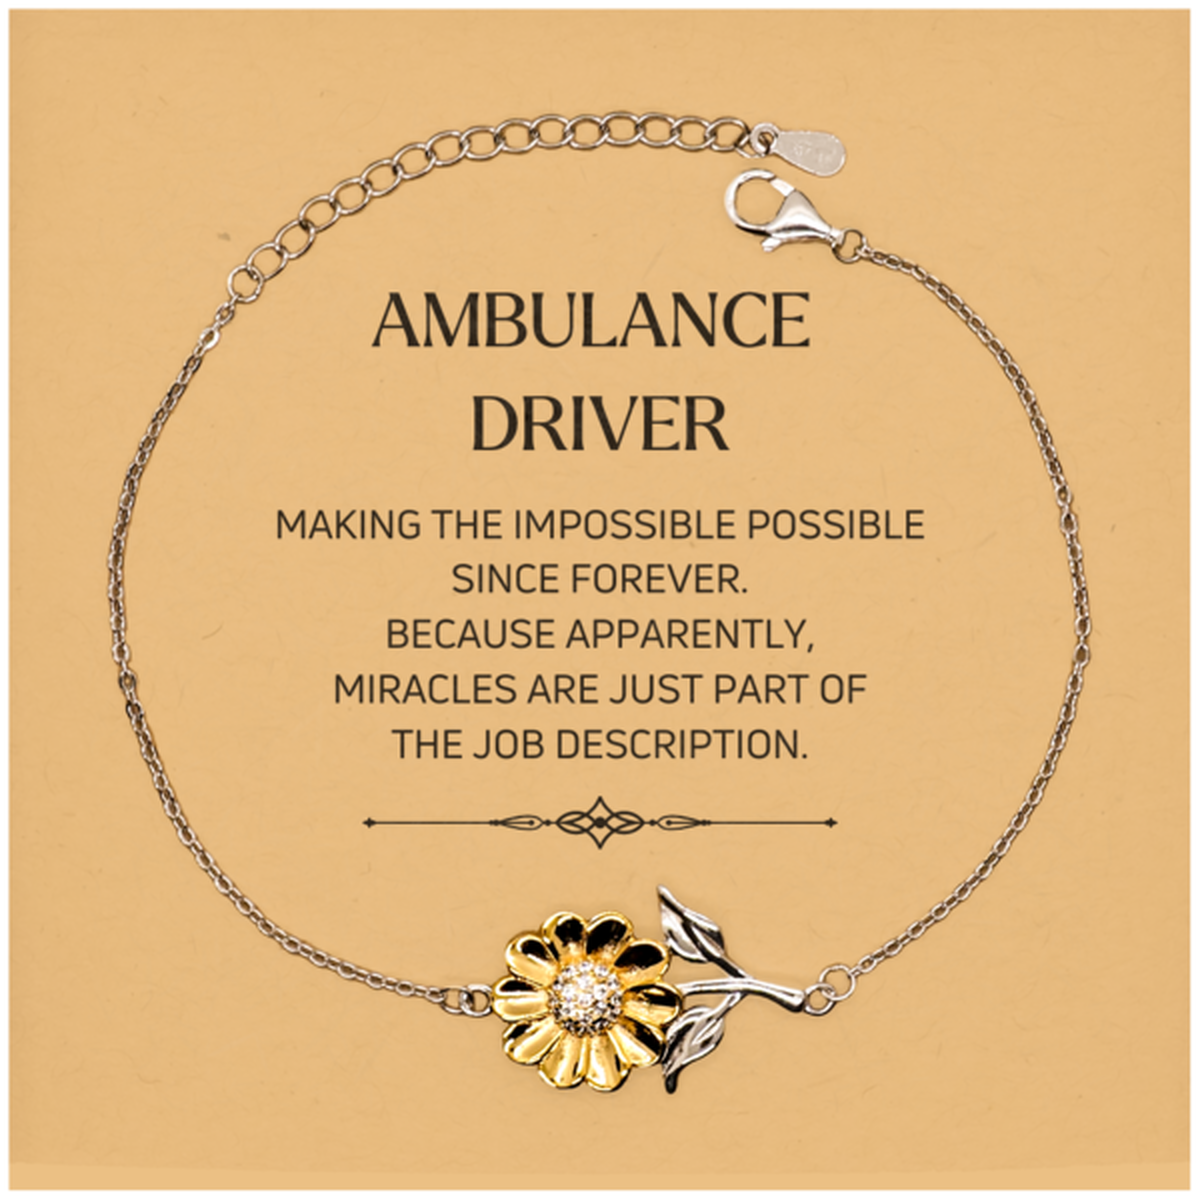 Funny Ambulance Driver Gifts, Miracles are just part of the job description, Inspirational Birthday Christmas Sunflower Bracelet For Ambulance Driver, Men, Women, Coworkers, Friends, Boss